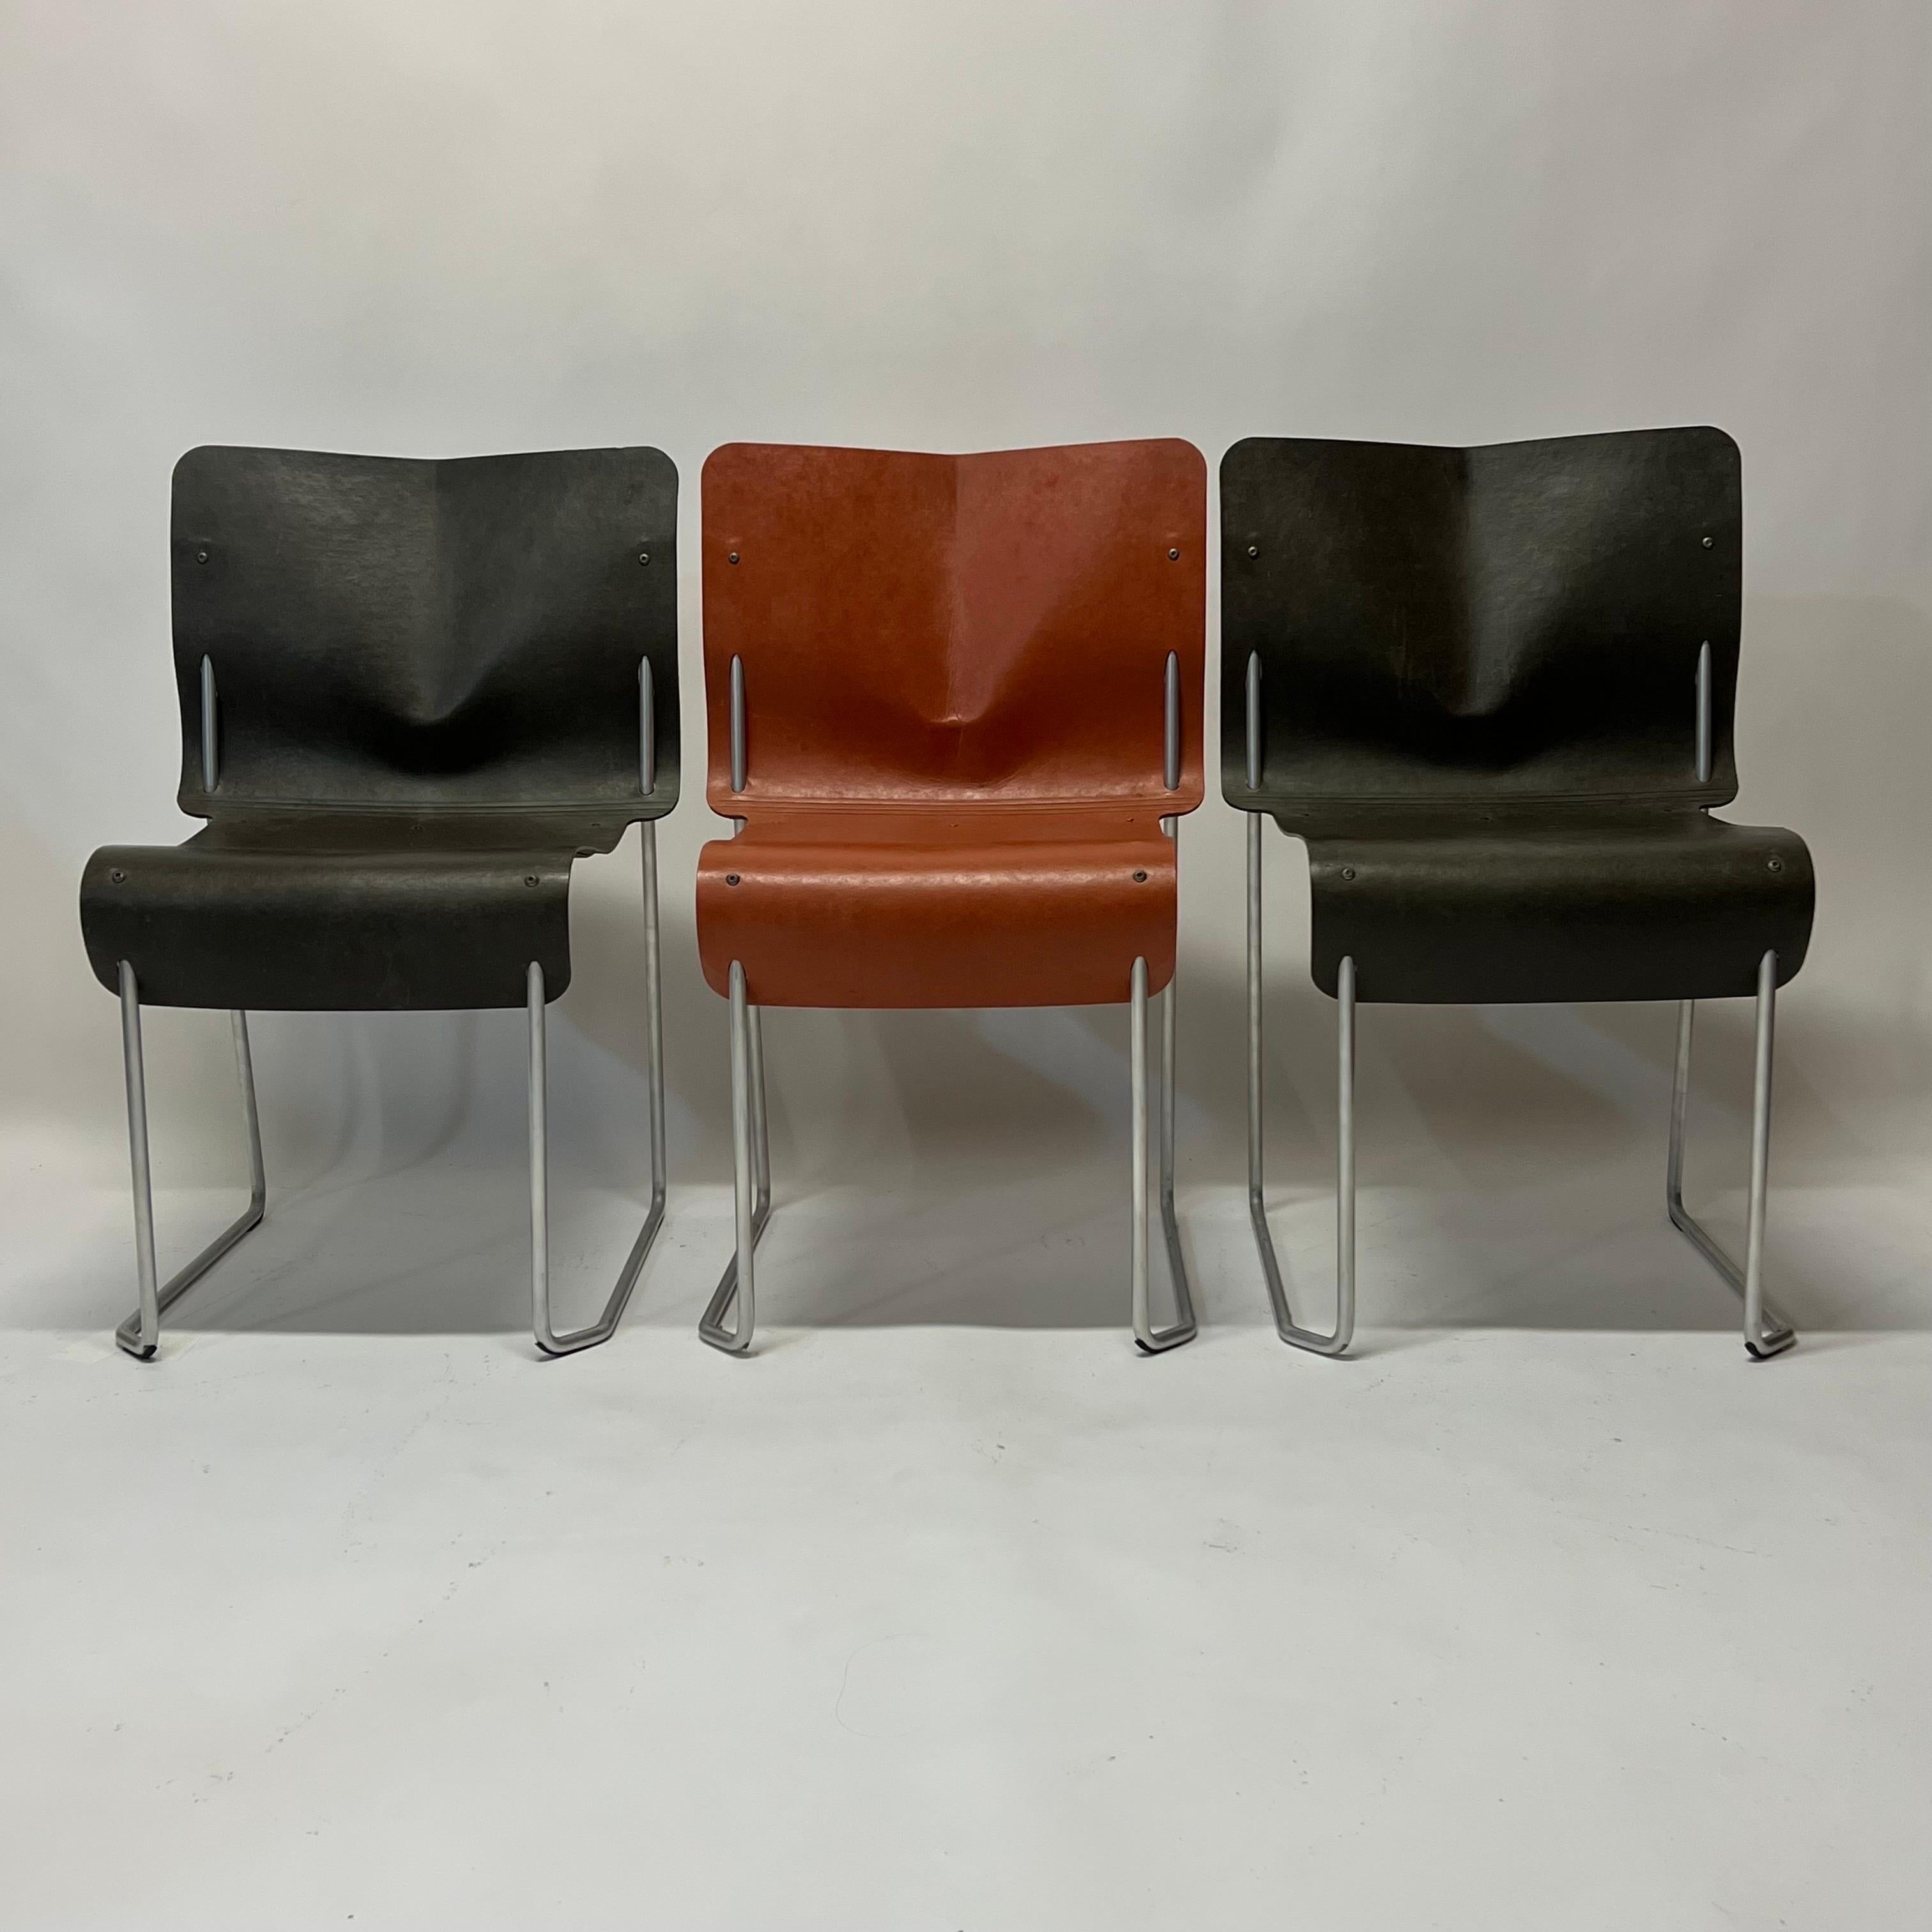 These are fantastic set of six lightweight paper and aluminum stacking chairs by Toshiaki Horio for Muji/Cassina, Japan, circa 1992. Only produced for two years, and only sold in the Asia market, it won a 